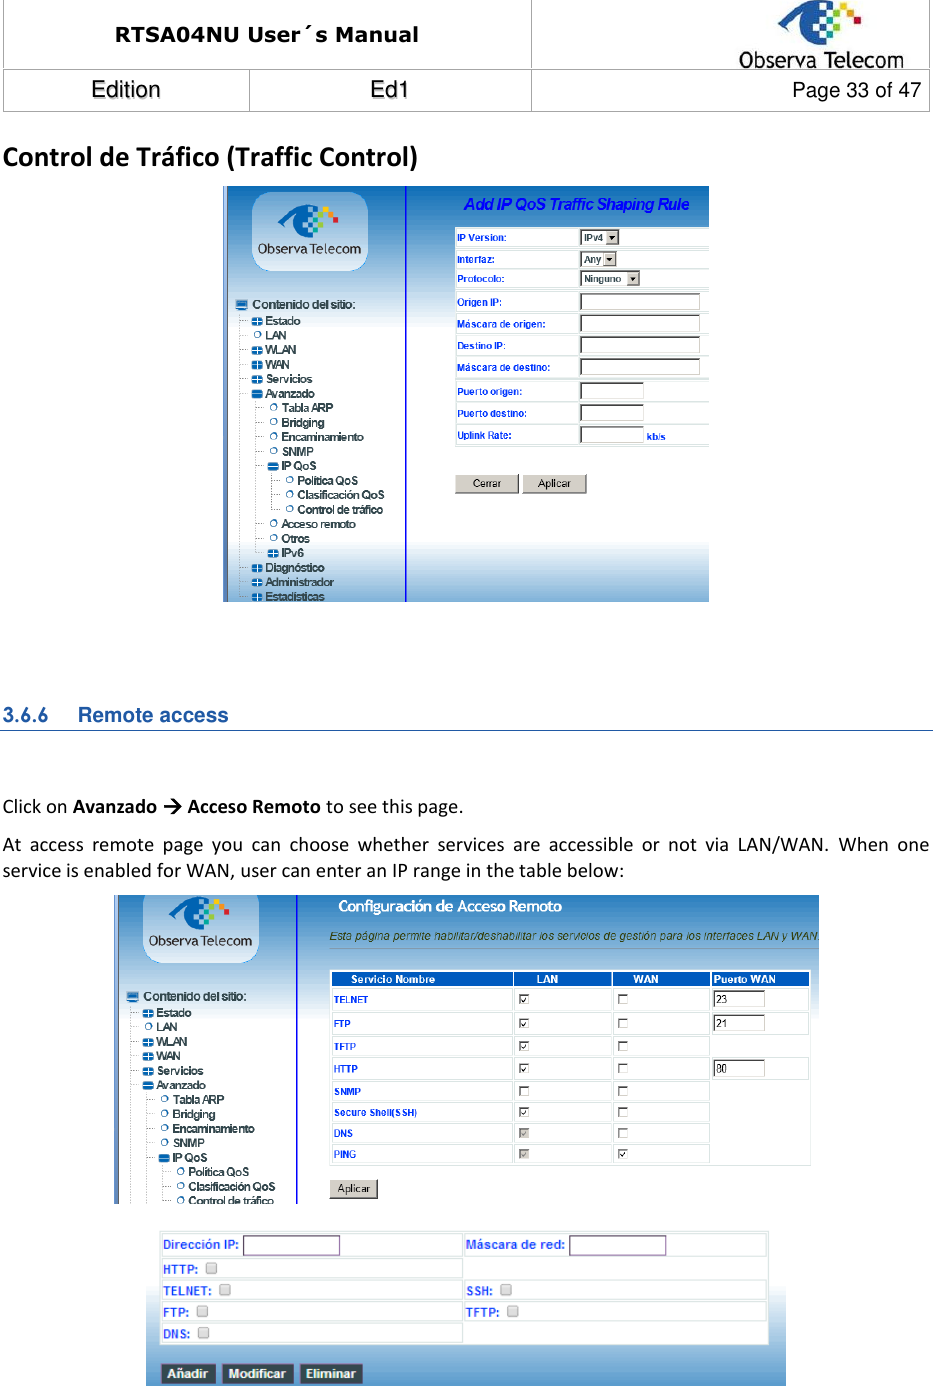 RTSA04NU User´s Manual  EEddiittiioonn  EEdd11  Page 33 of 47  Control de Tráfico (Traffic Control)    3.6.6  Remote access  Click on Avanzado  Acceso Remoto to see this page. At  access  remote  page  you  can  choose  whether  services  are  accessible  or  not  via  LAN/WAN.  When  one service is enabled for WAN, user can enter an IP range in the table below:        